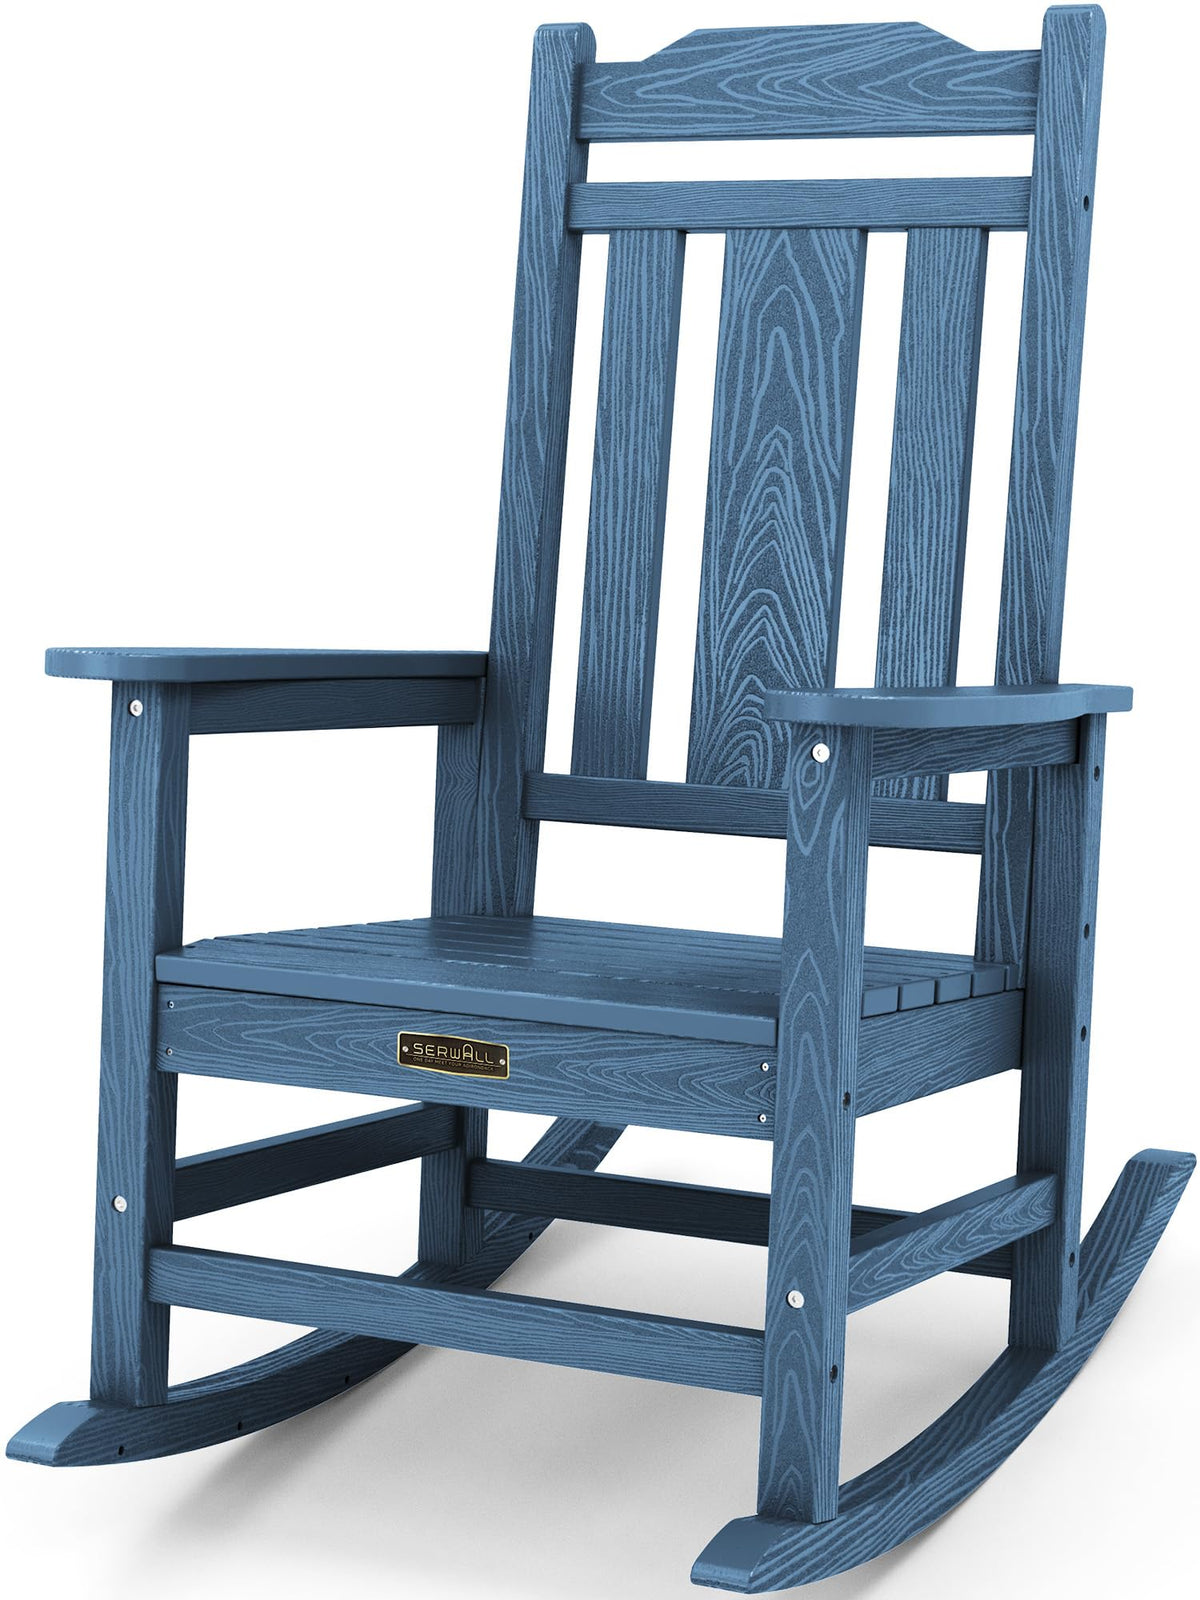 SERWALL Outdoor Rocking Chair, HDPE Poly Rocking Chair for Adults, Blue